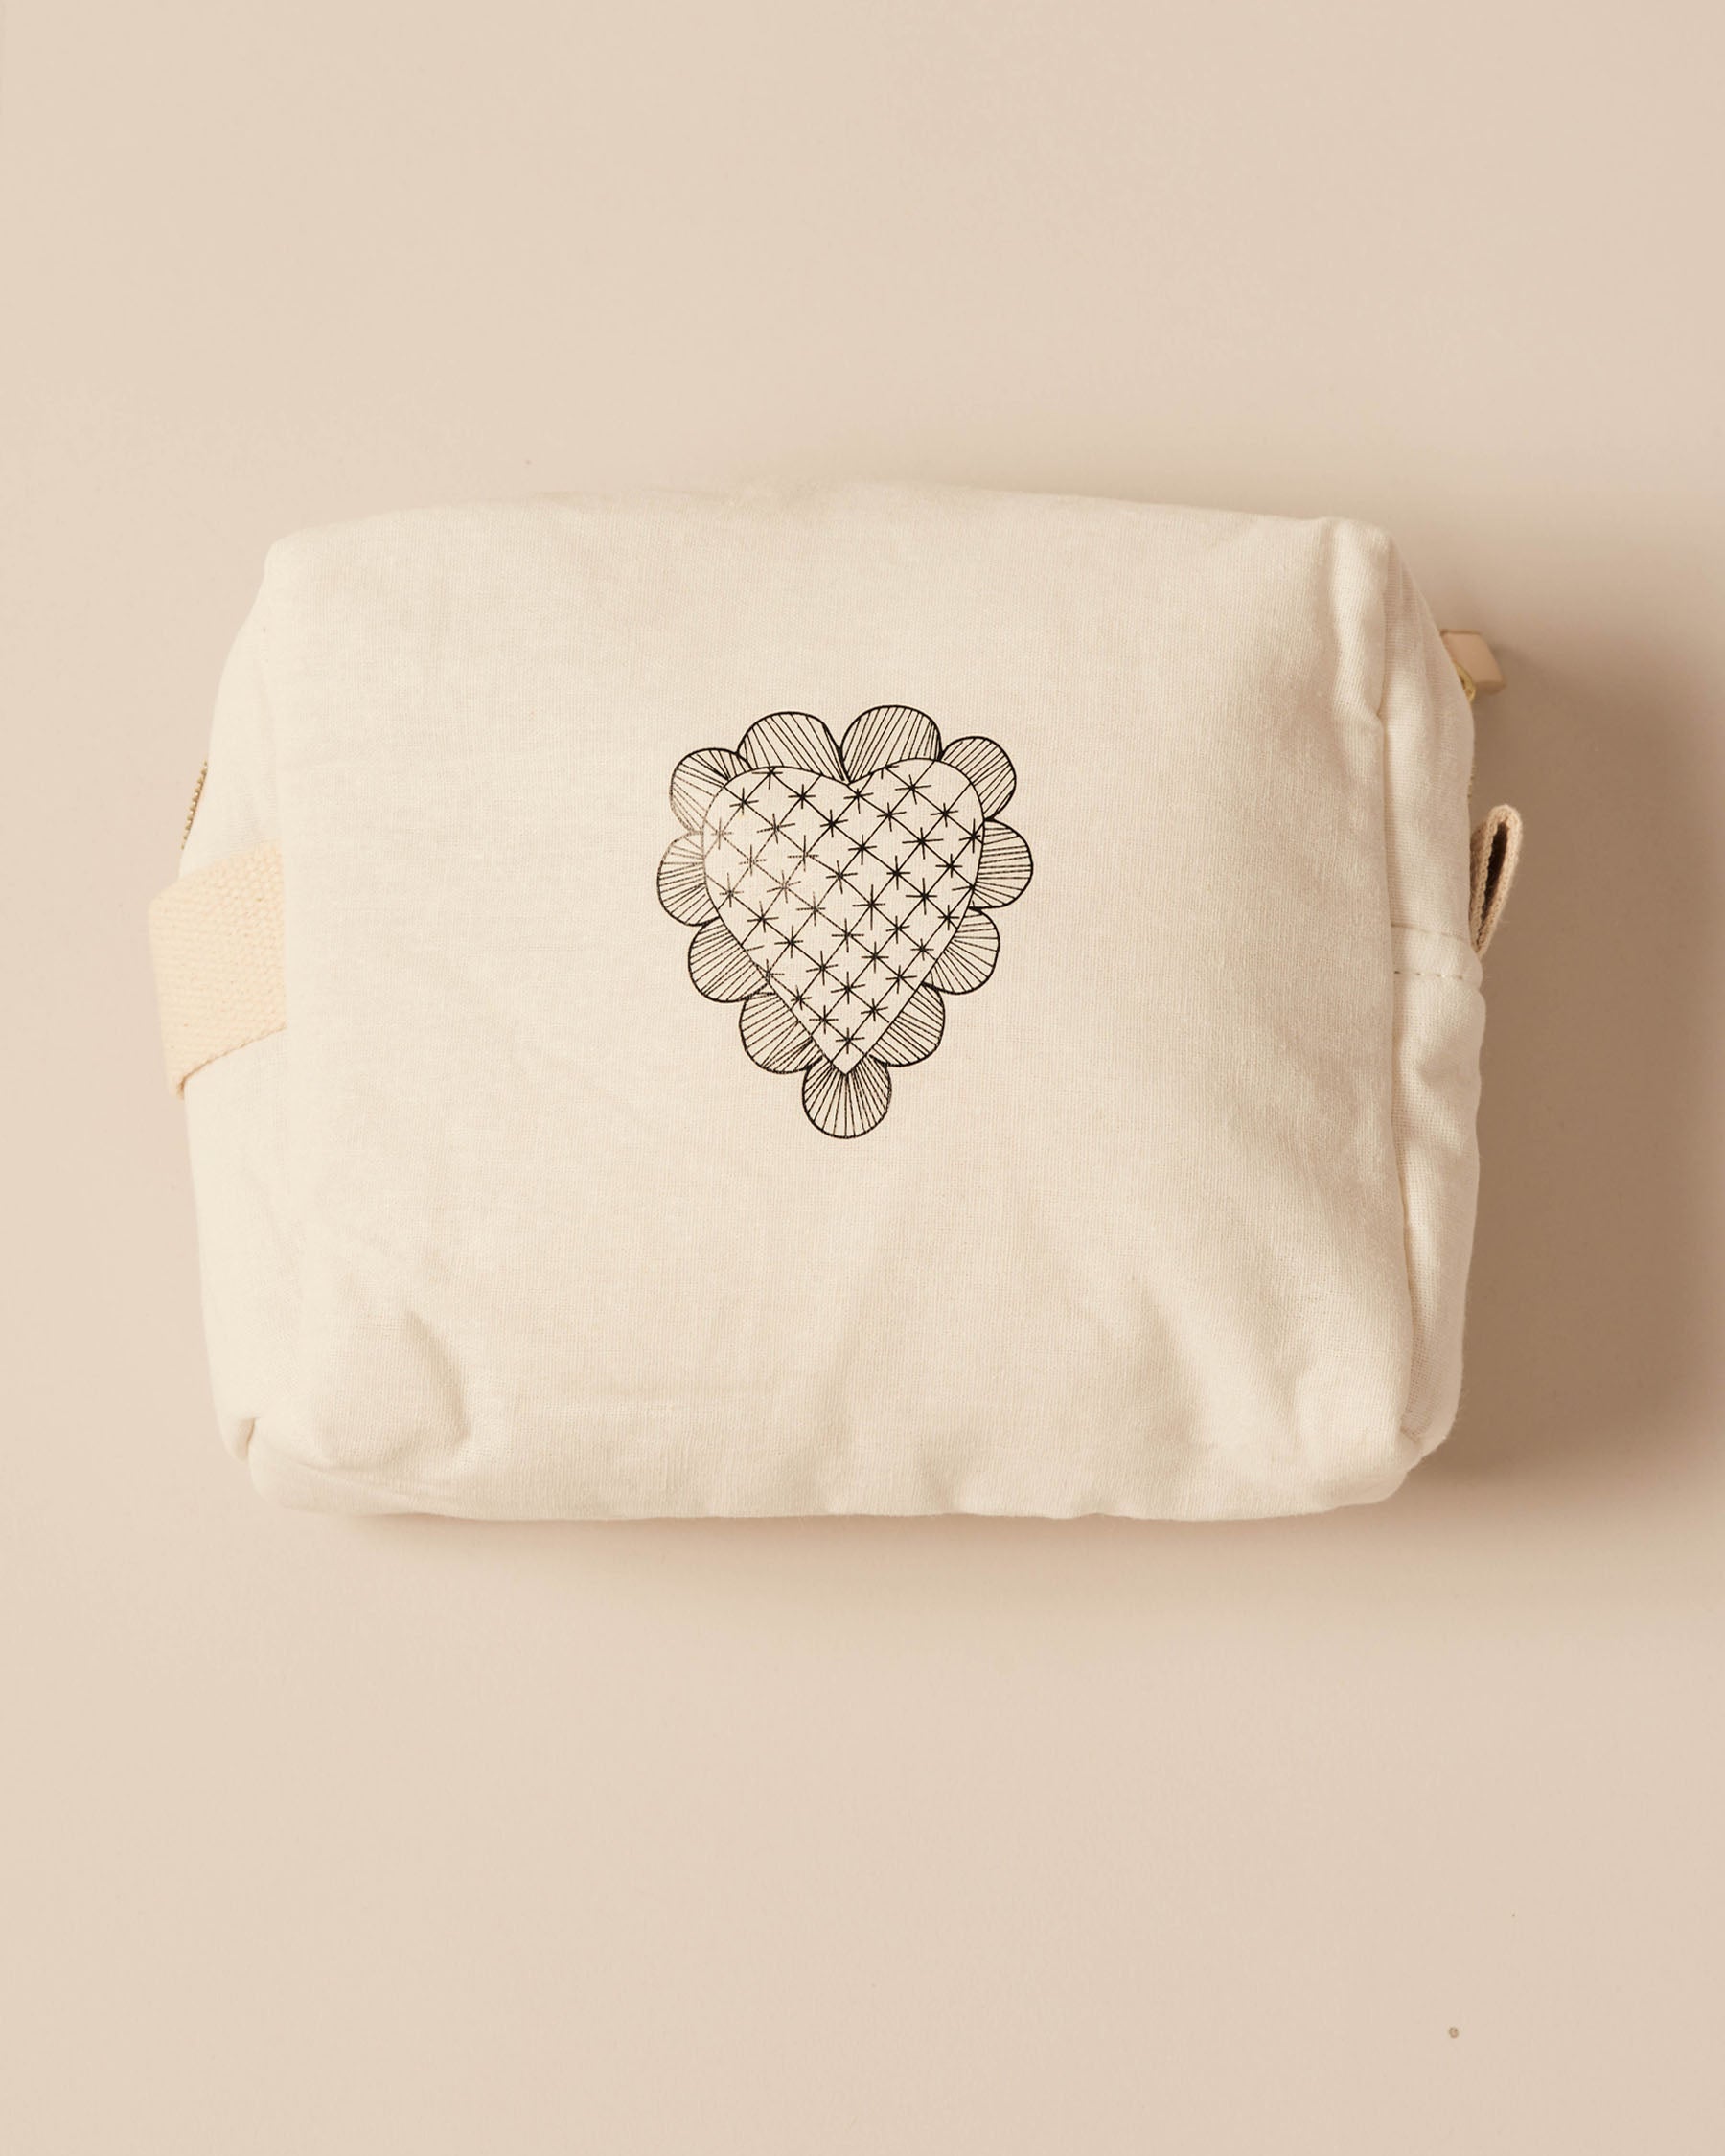 Heart Toiletry Bag | Limited Edition